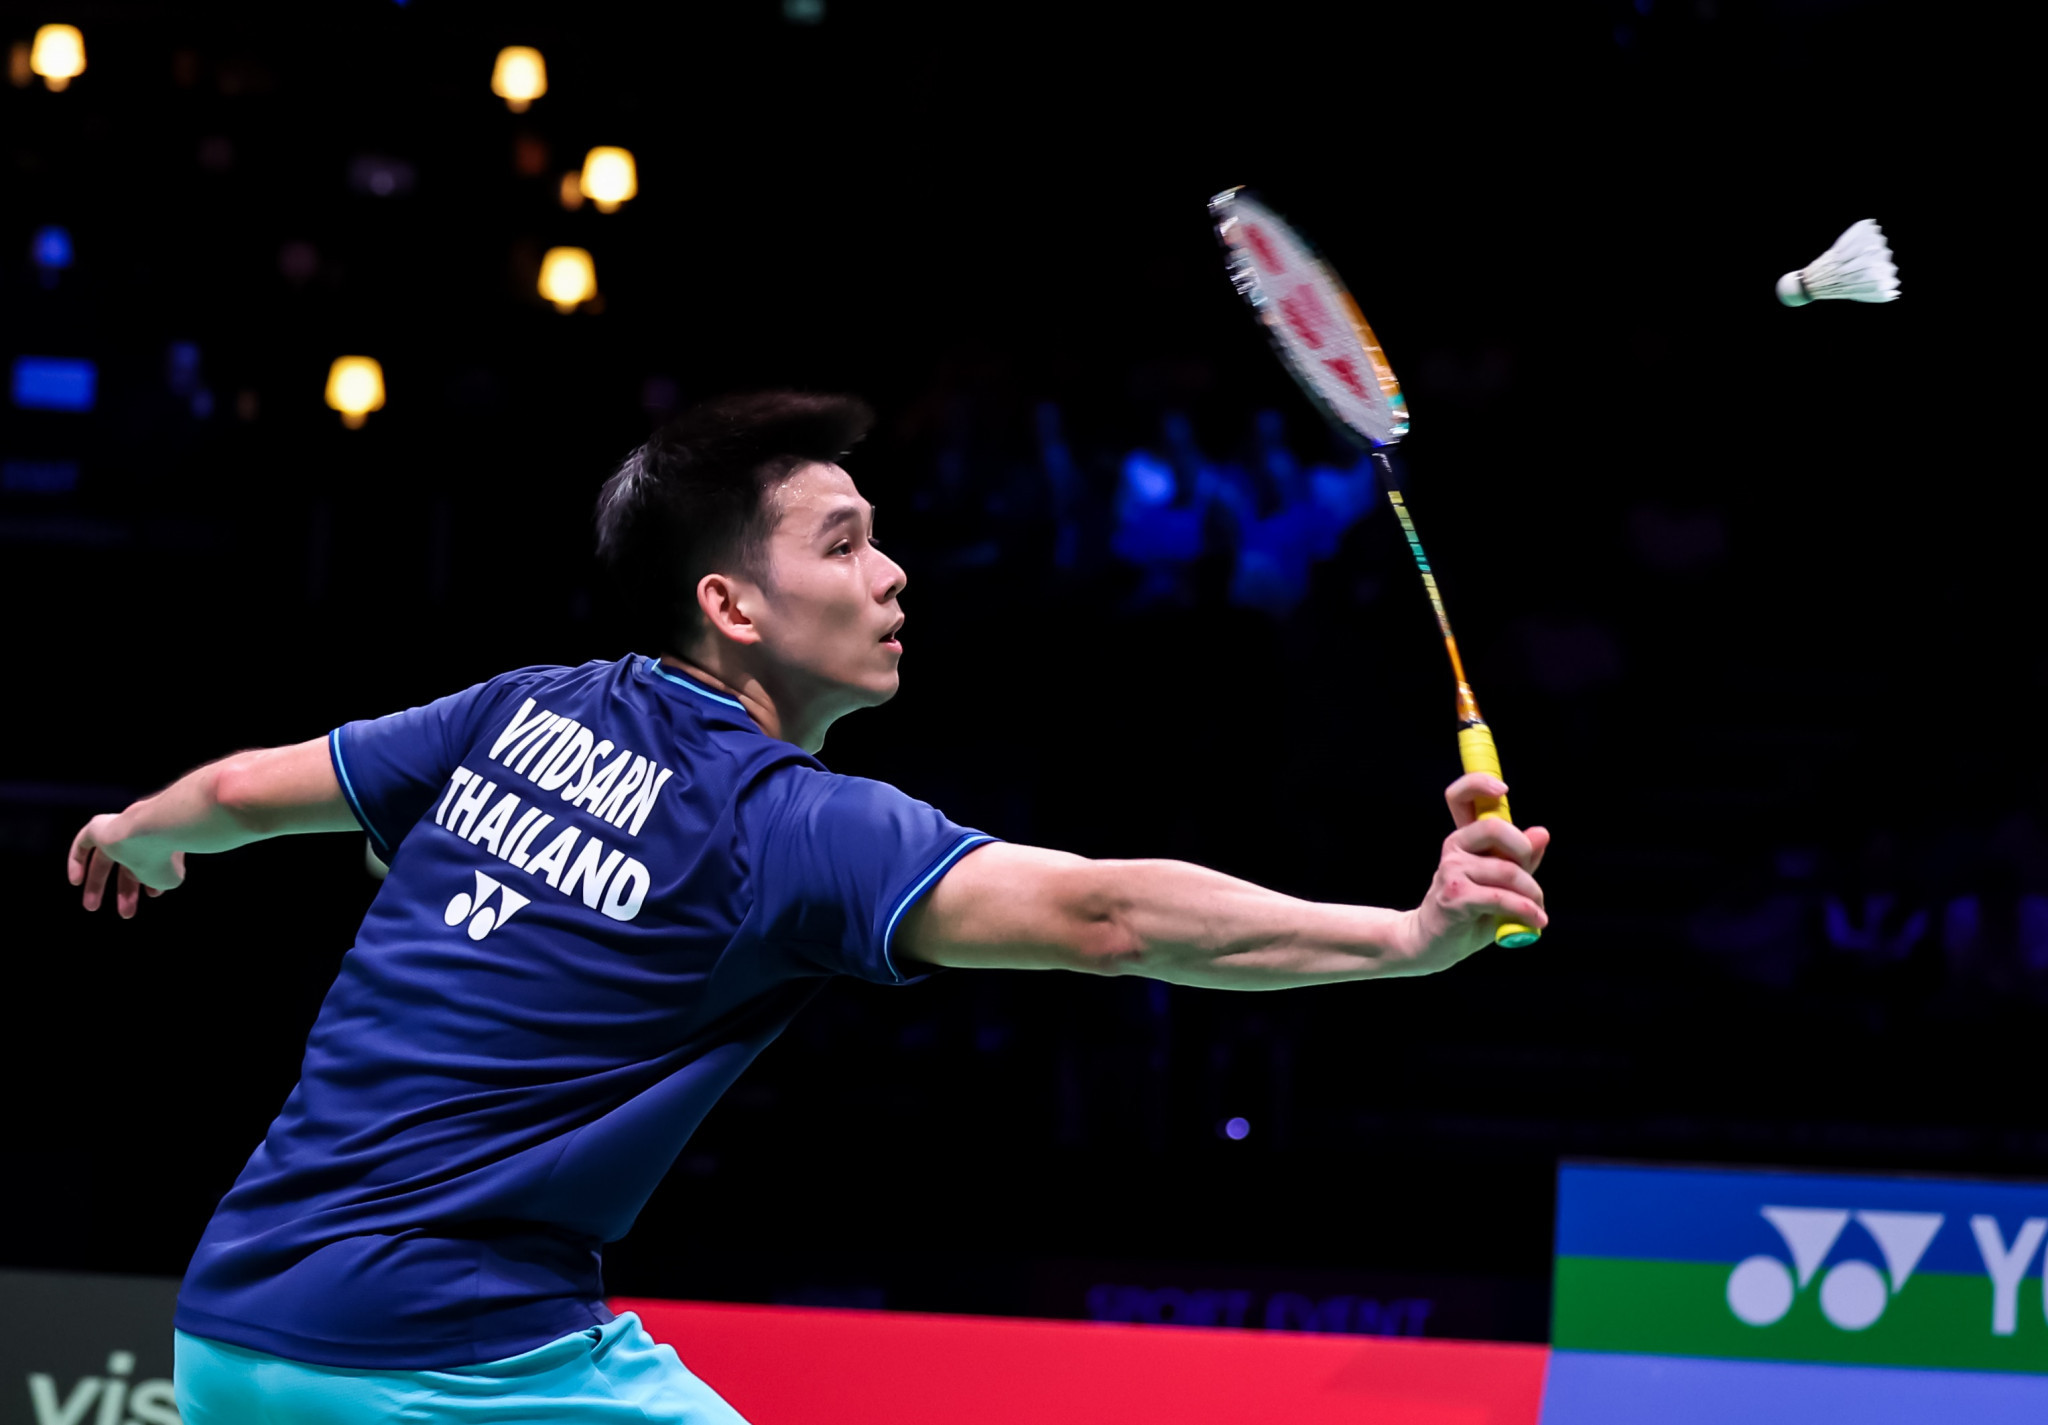 World silver medallist Kunlavut Vitidsarn came from behind to beat India's HS Prannoy to advance to the men's singles final ©Badmintonphoto